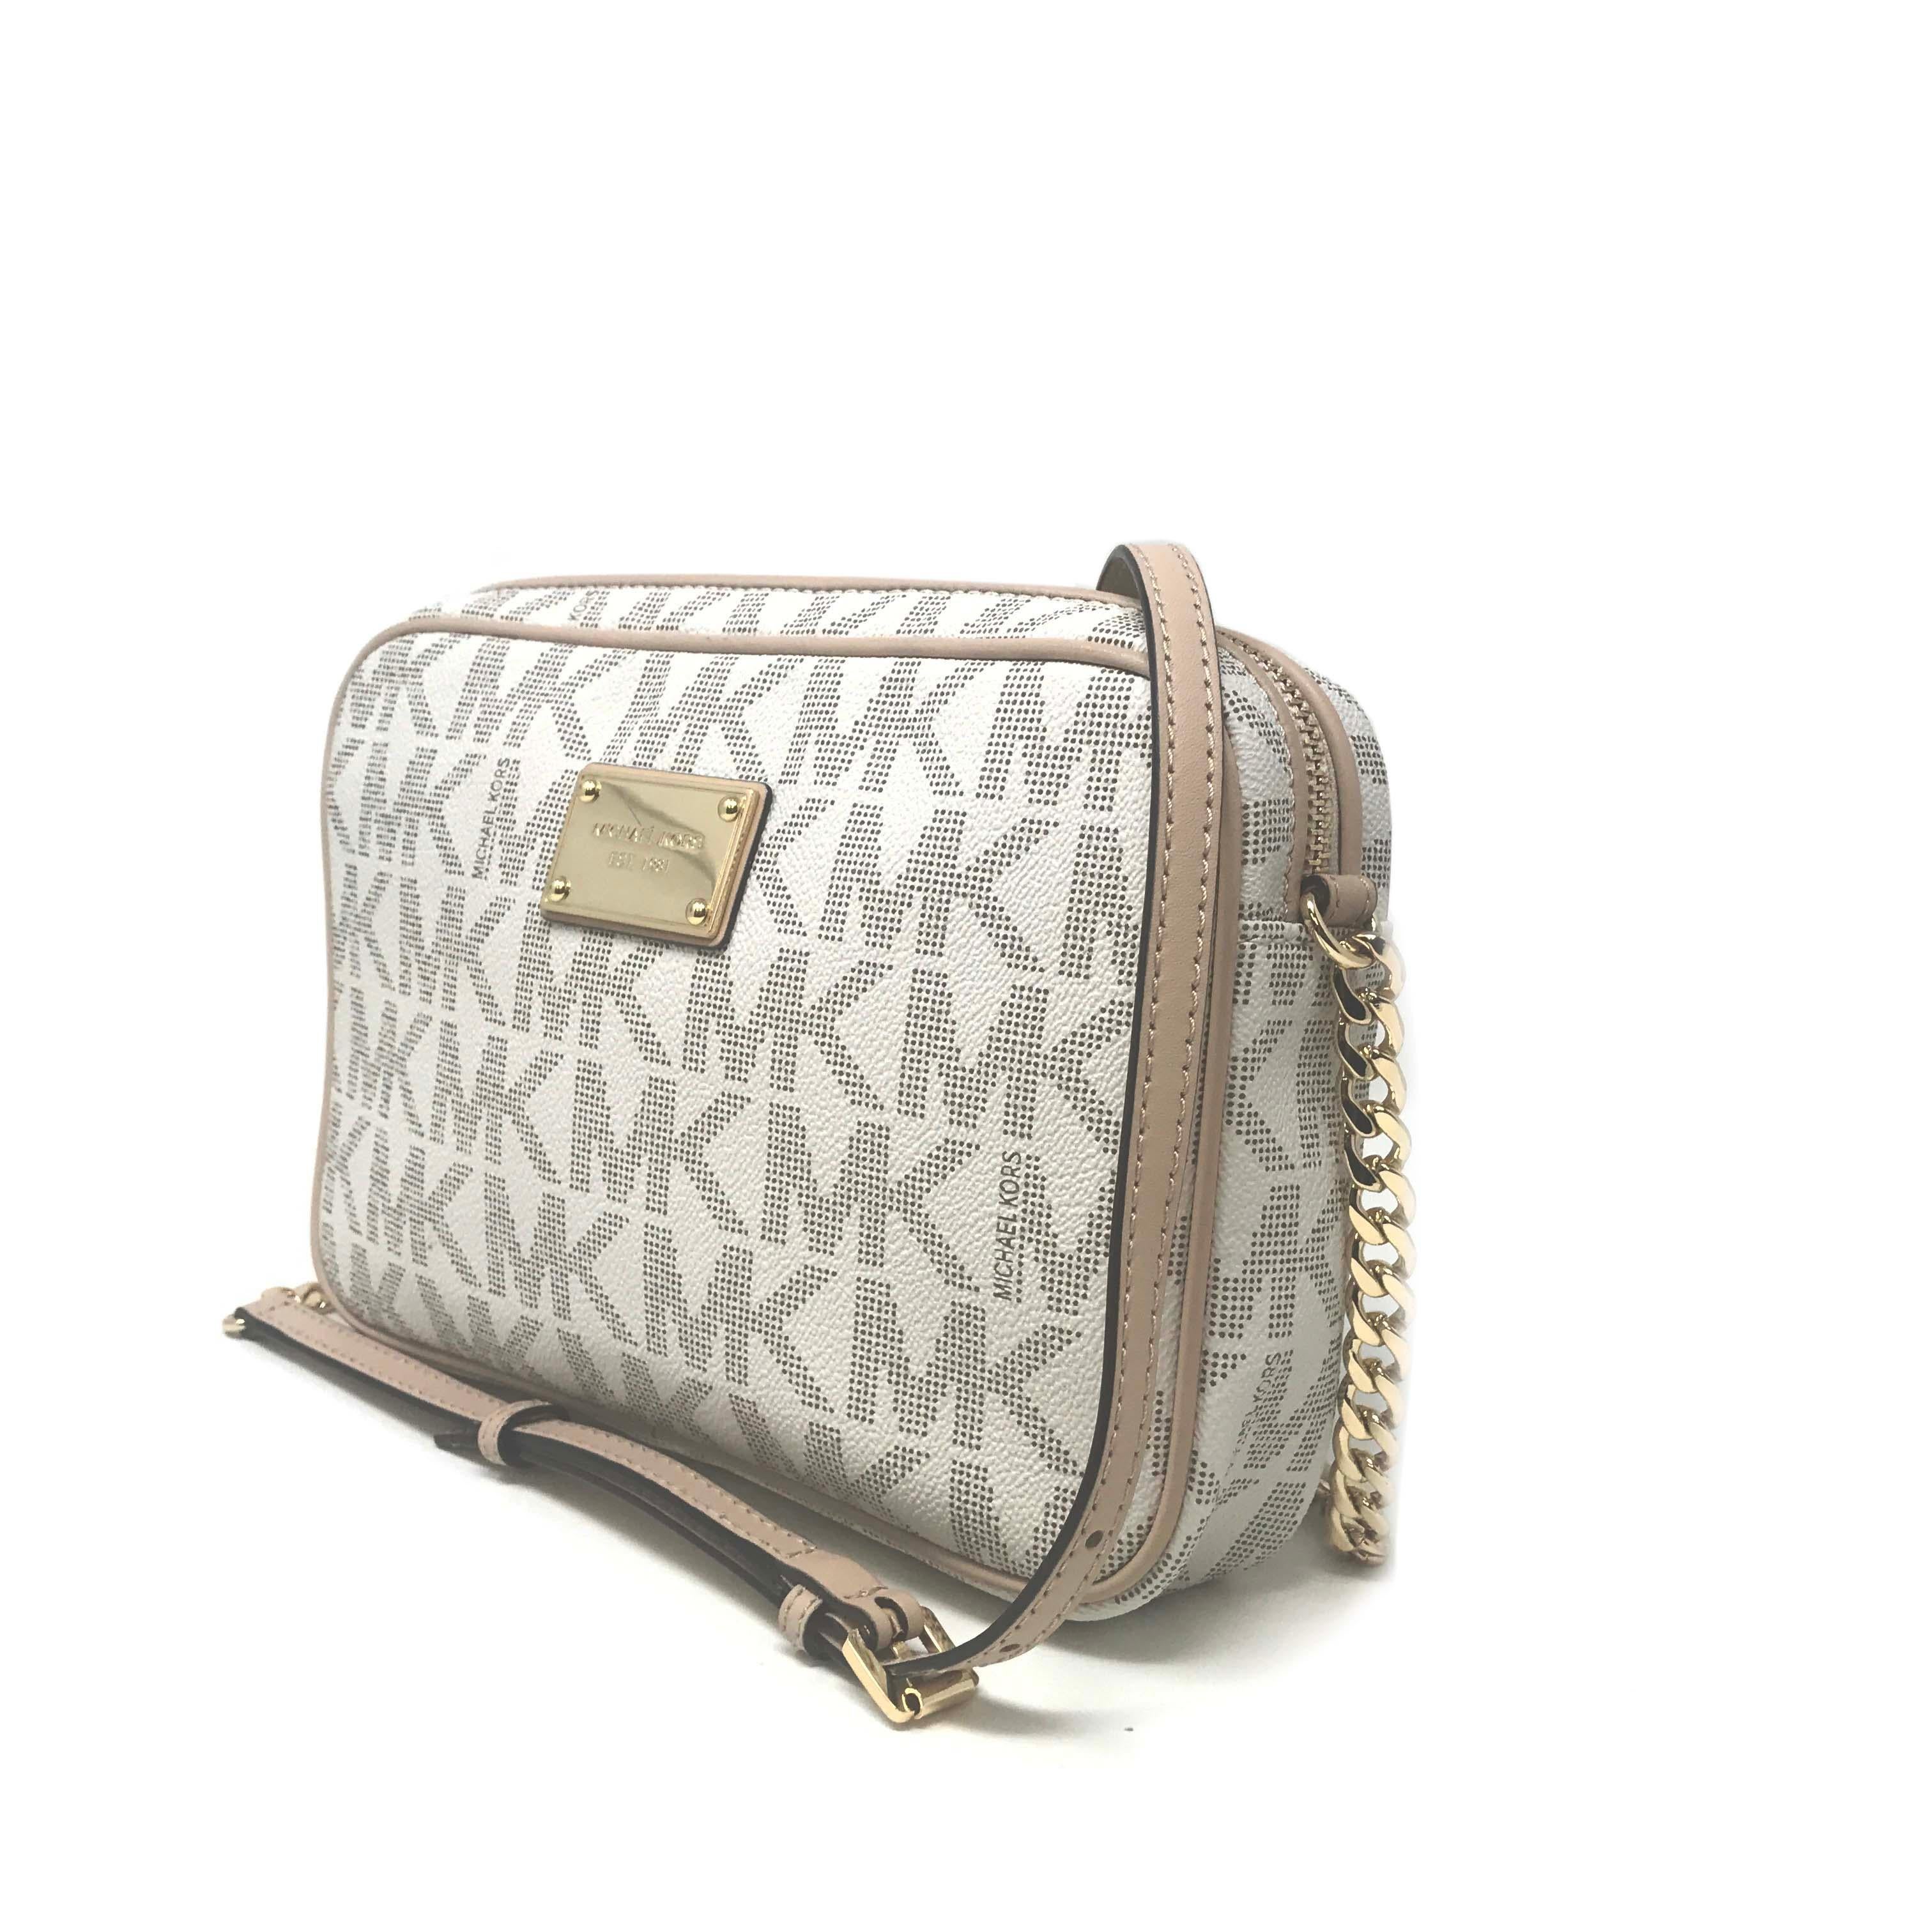 This Michael Kors Jet Set Crossbody Bag features a vanilla color and signature polyester lining. This crossbody bag is constructed of PVC and has a 25 inch shoulder strap.  Have Some Scratches on Gold Tone Michael Kors Logo.

Handbag Material: